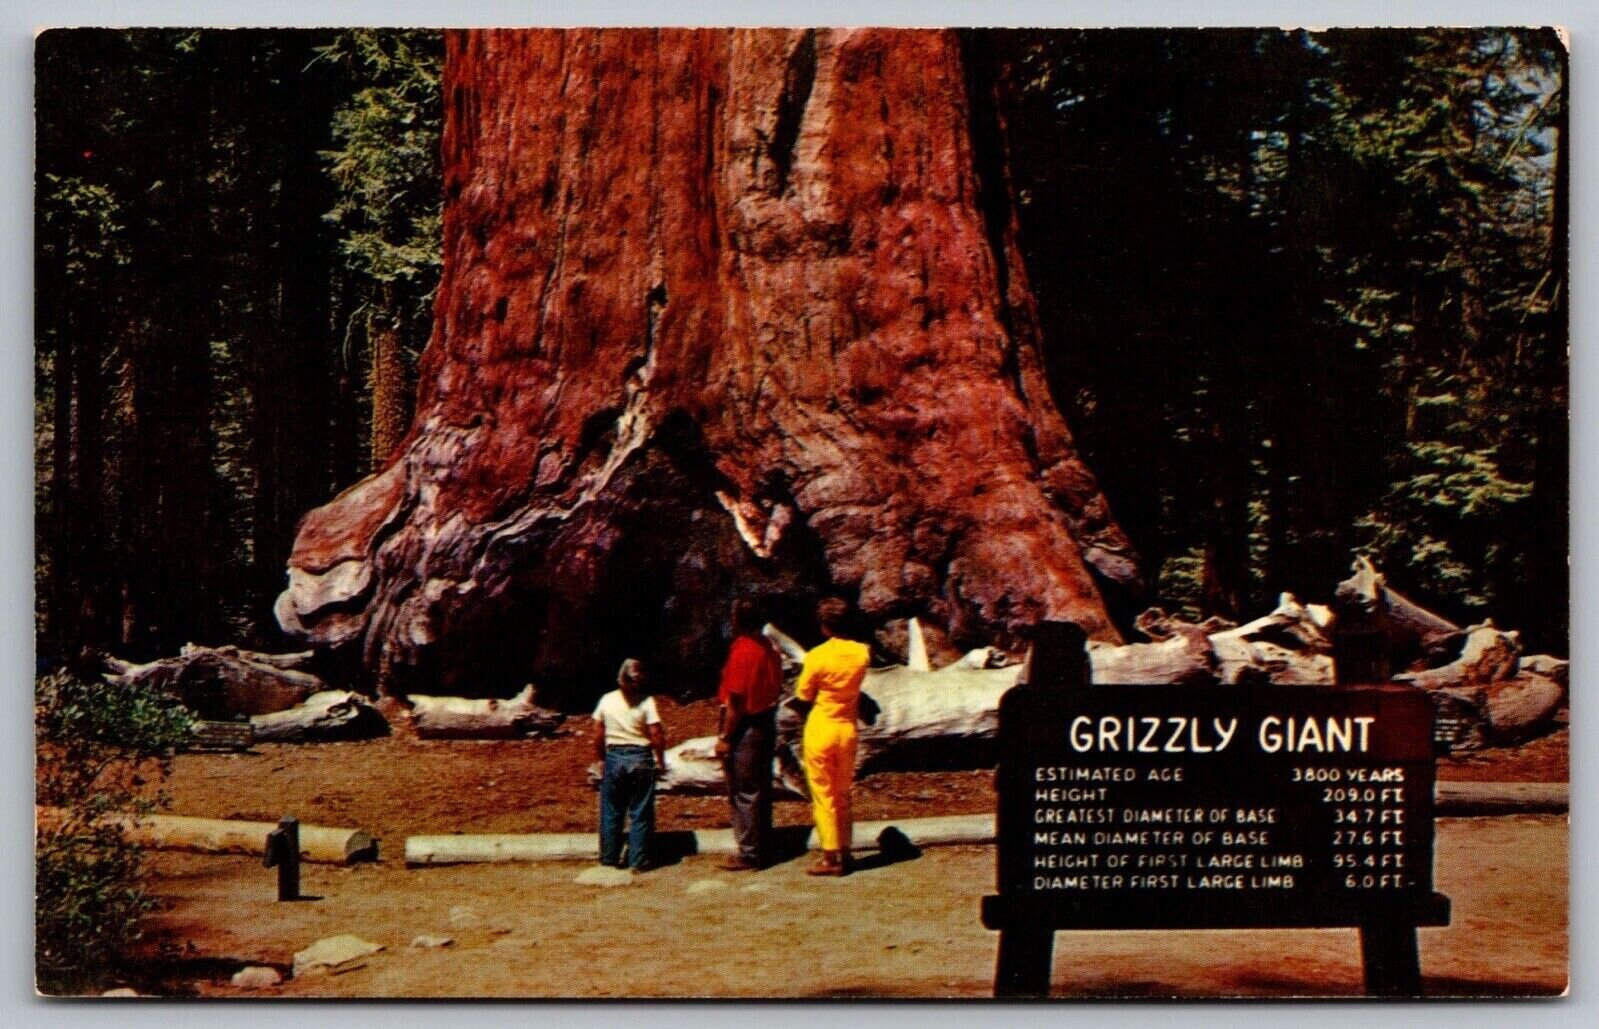 Grizzly Giant Yosemite National Park California Mariposa Grove Forest Postcard